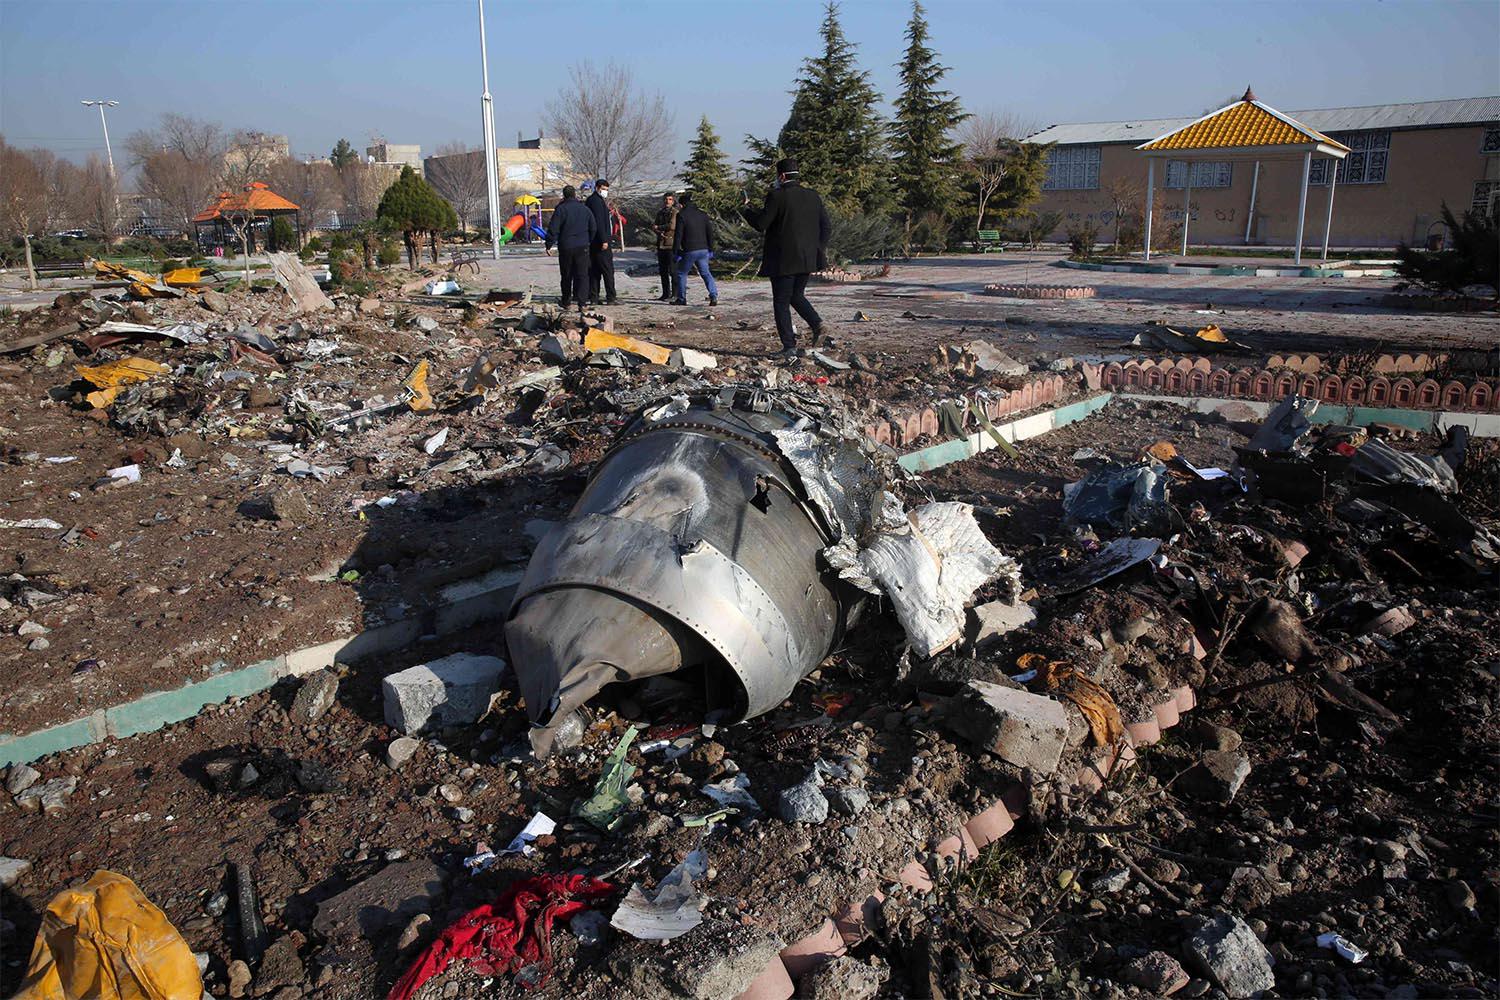 Rescue teams work amidst debris after a Ukrainian plane carrying 176 passengers crashed near Imam Khomeini airport in the Iranian capital Tehran 